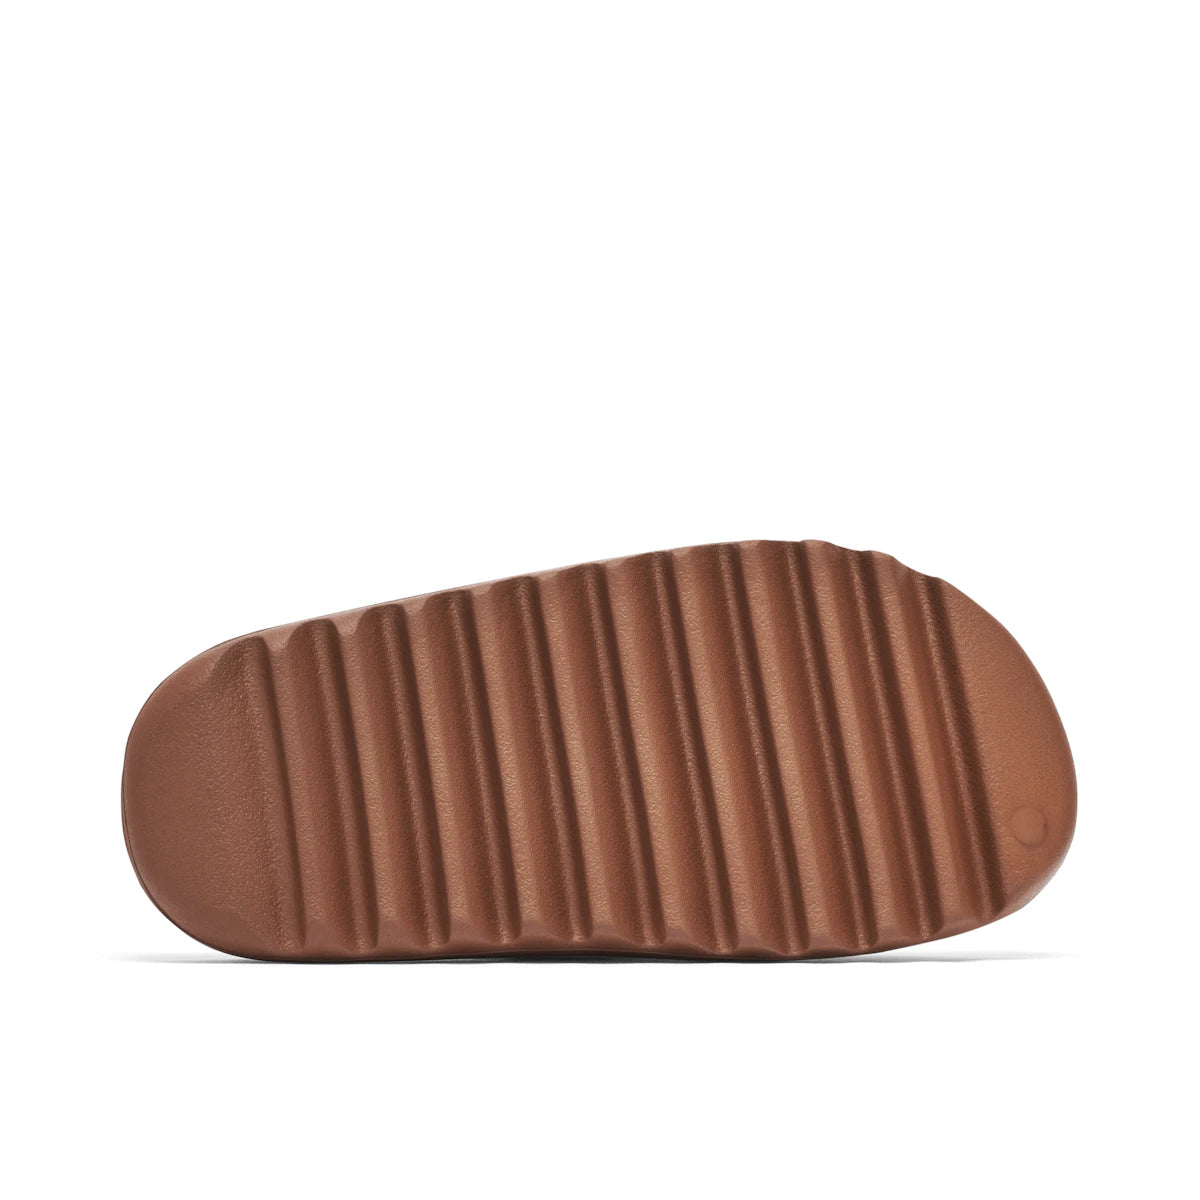 adidas Yeezy Slide Flax by Yeezy from £84.00